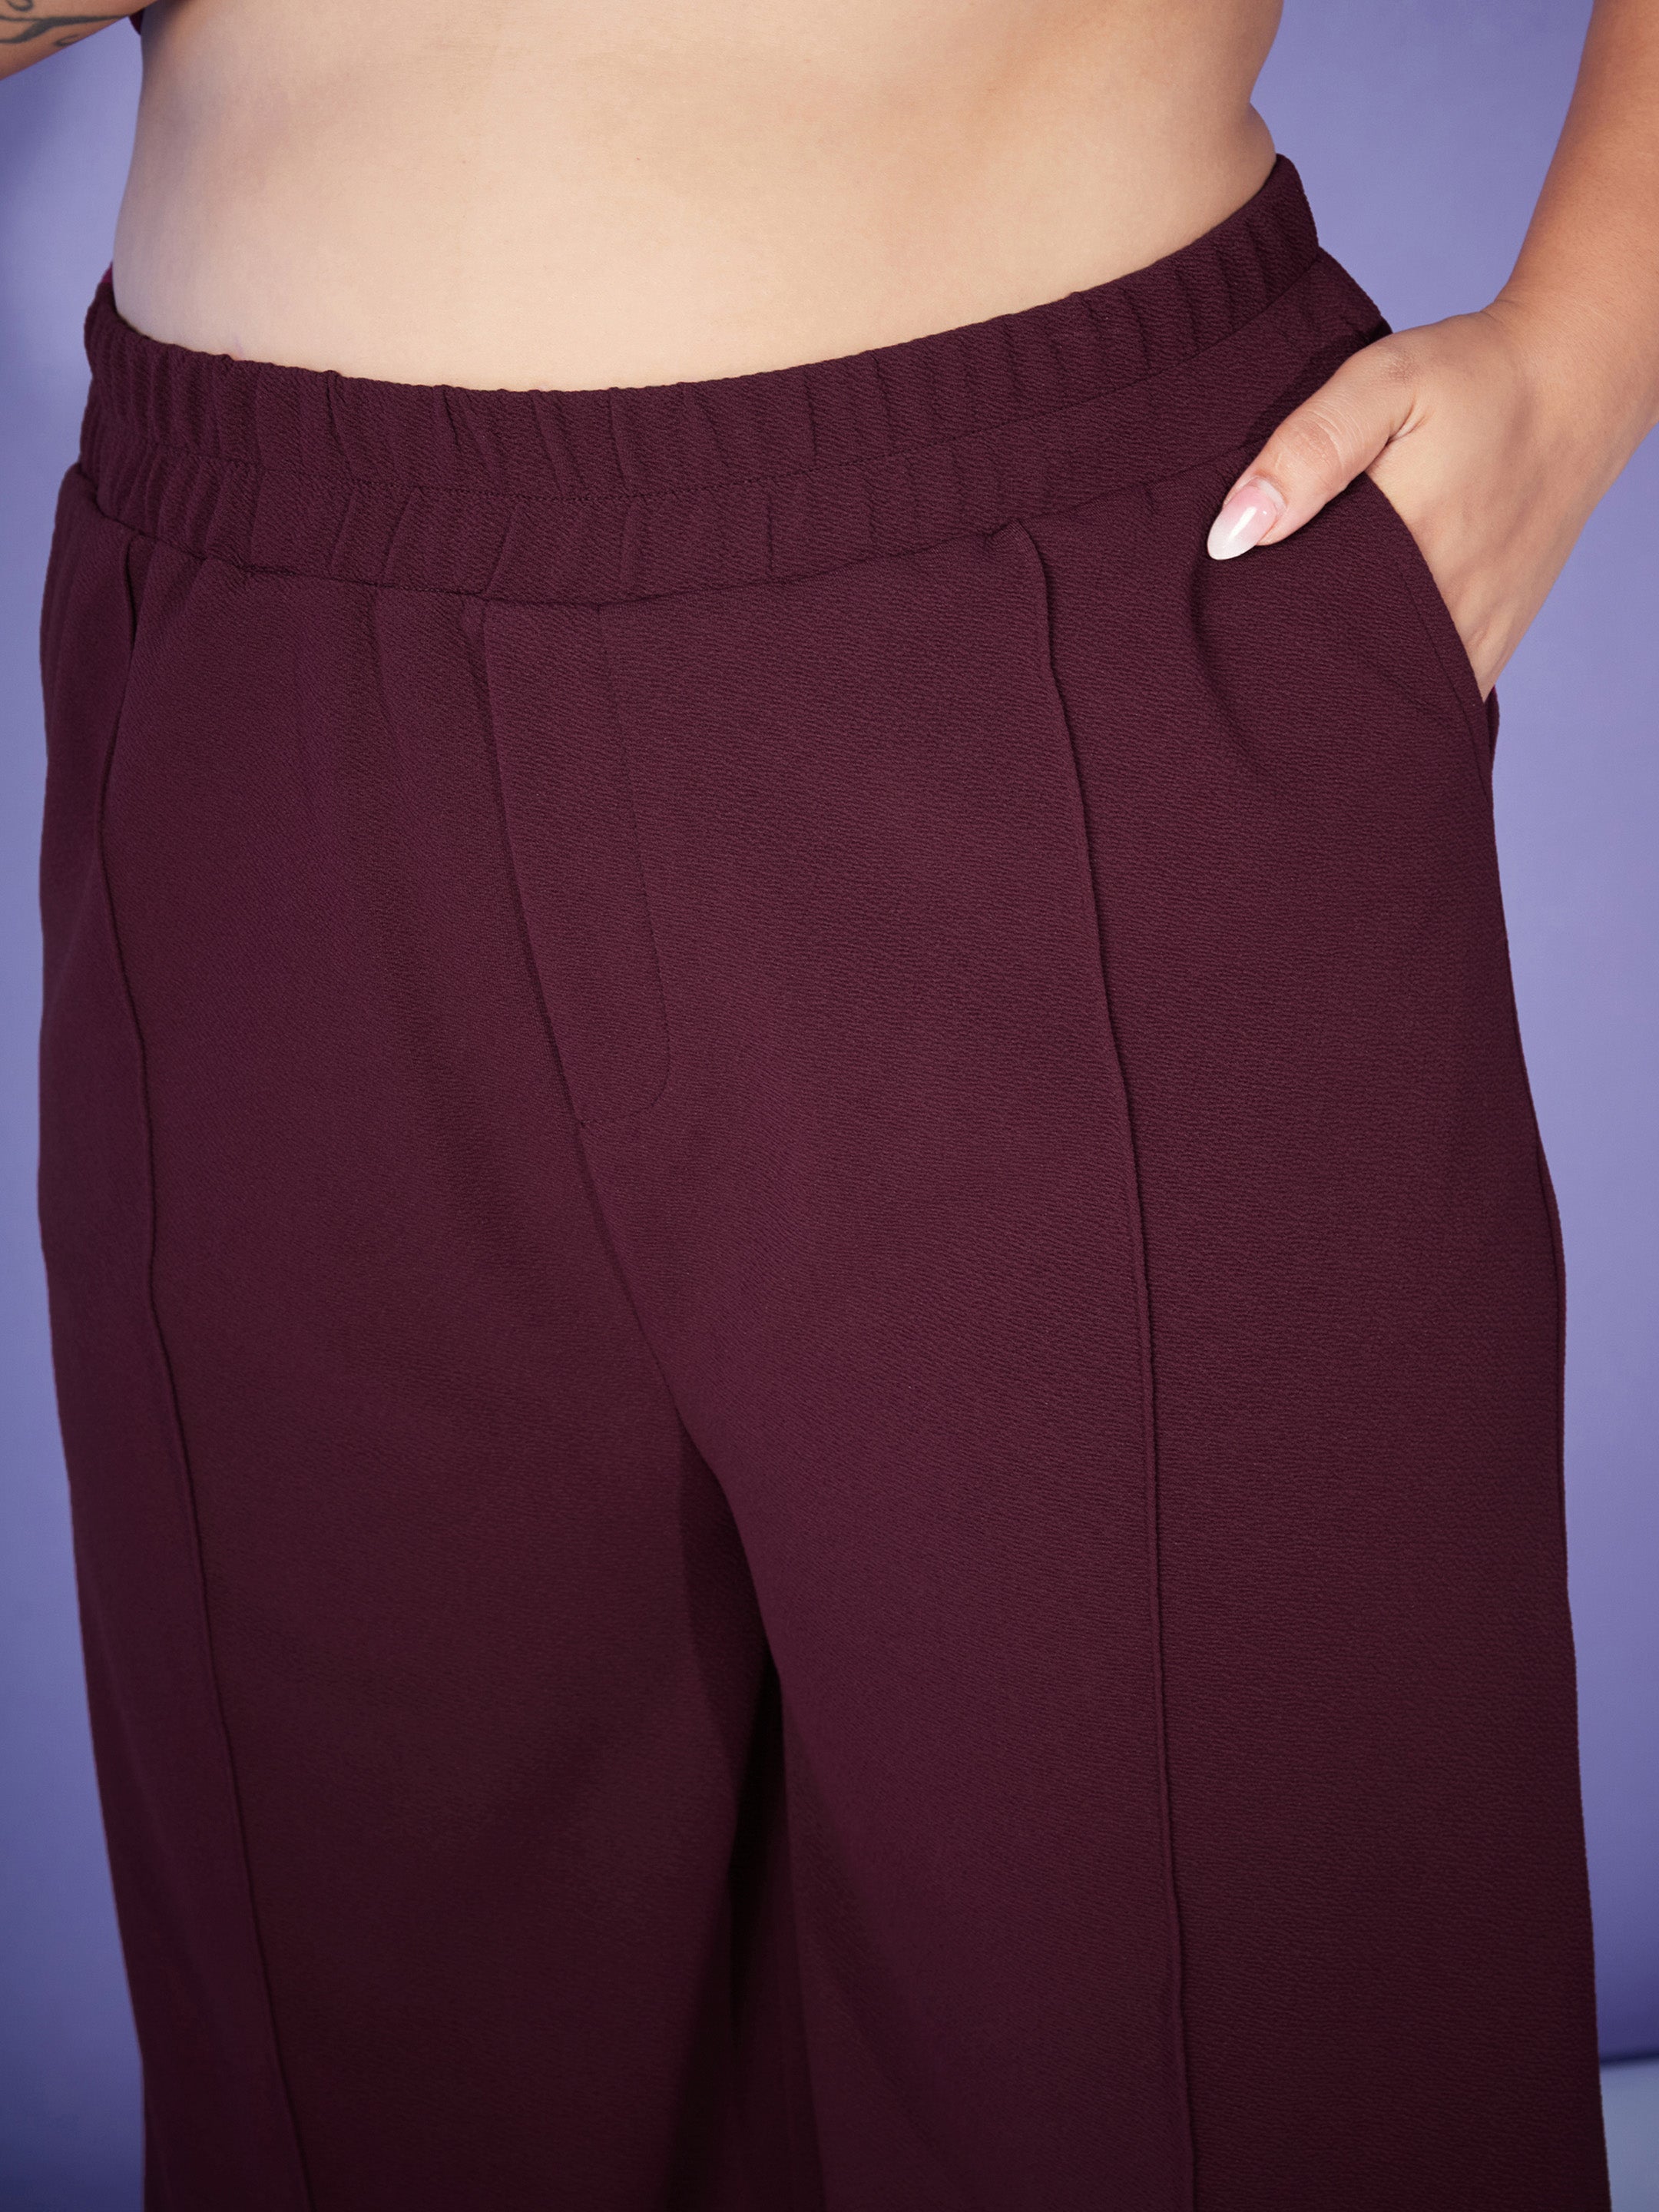 Women Burgundy Belted Top With Bell Bottom Pants